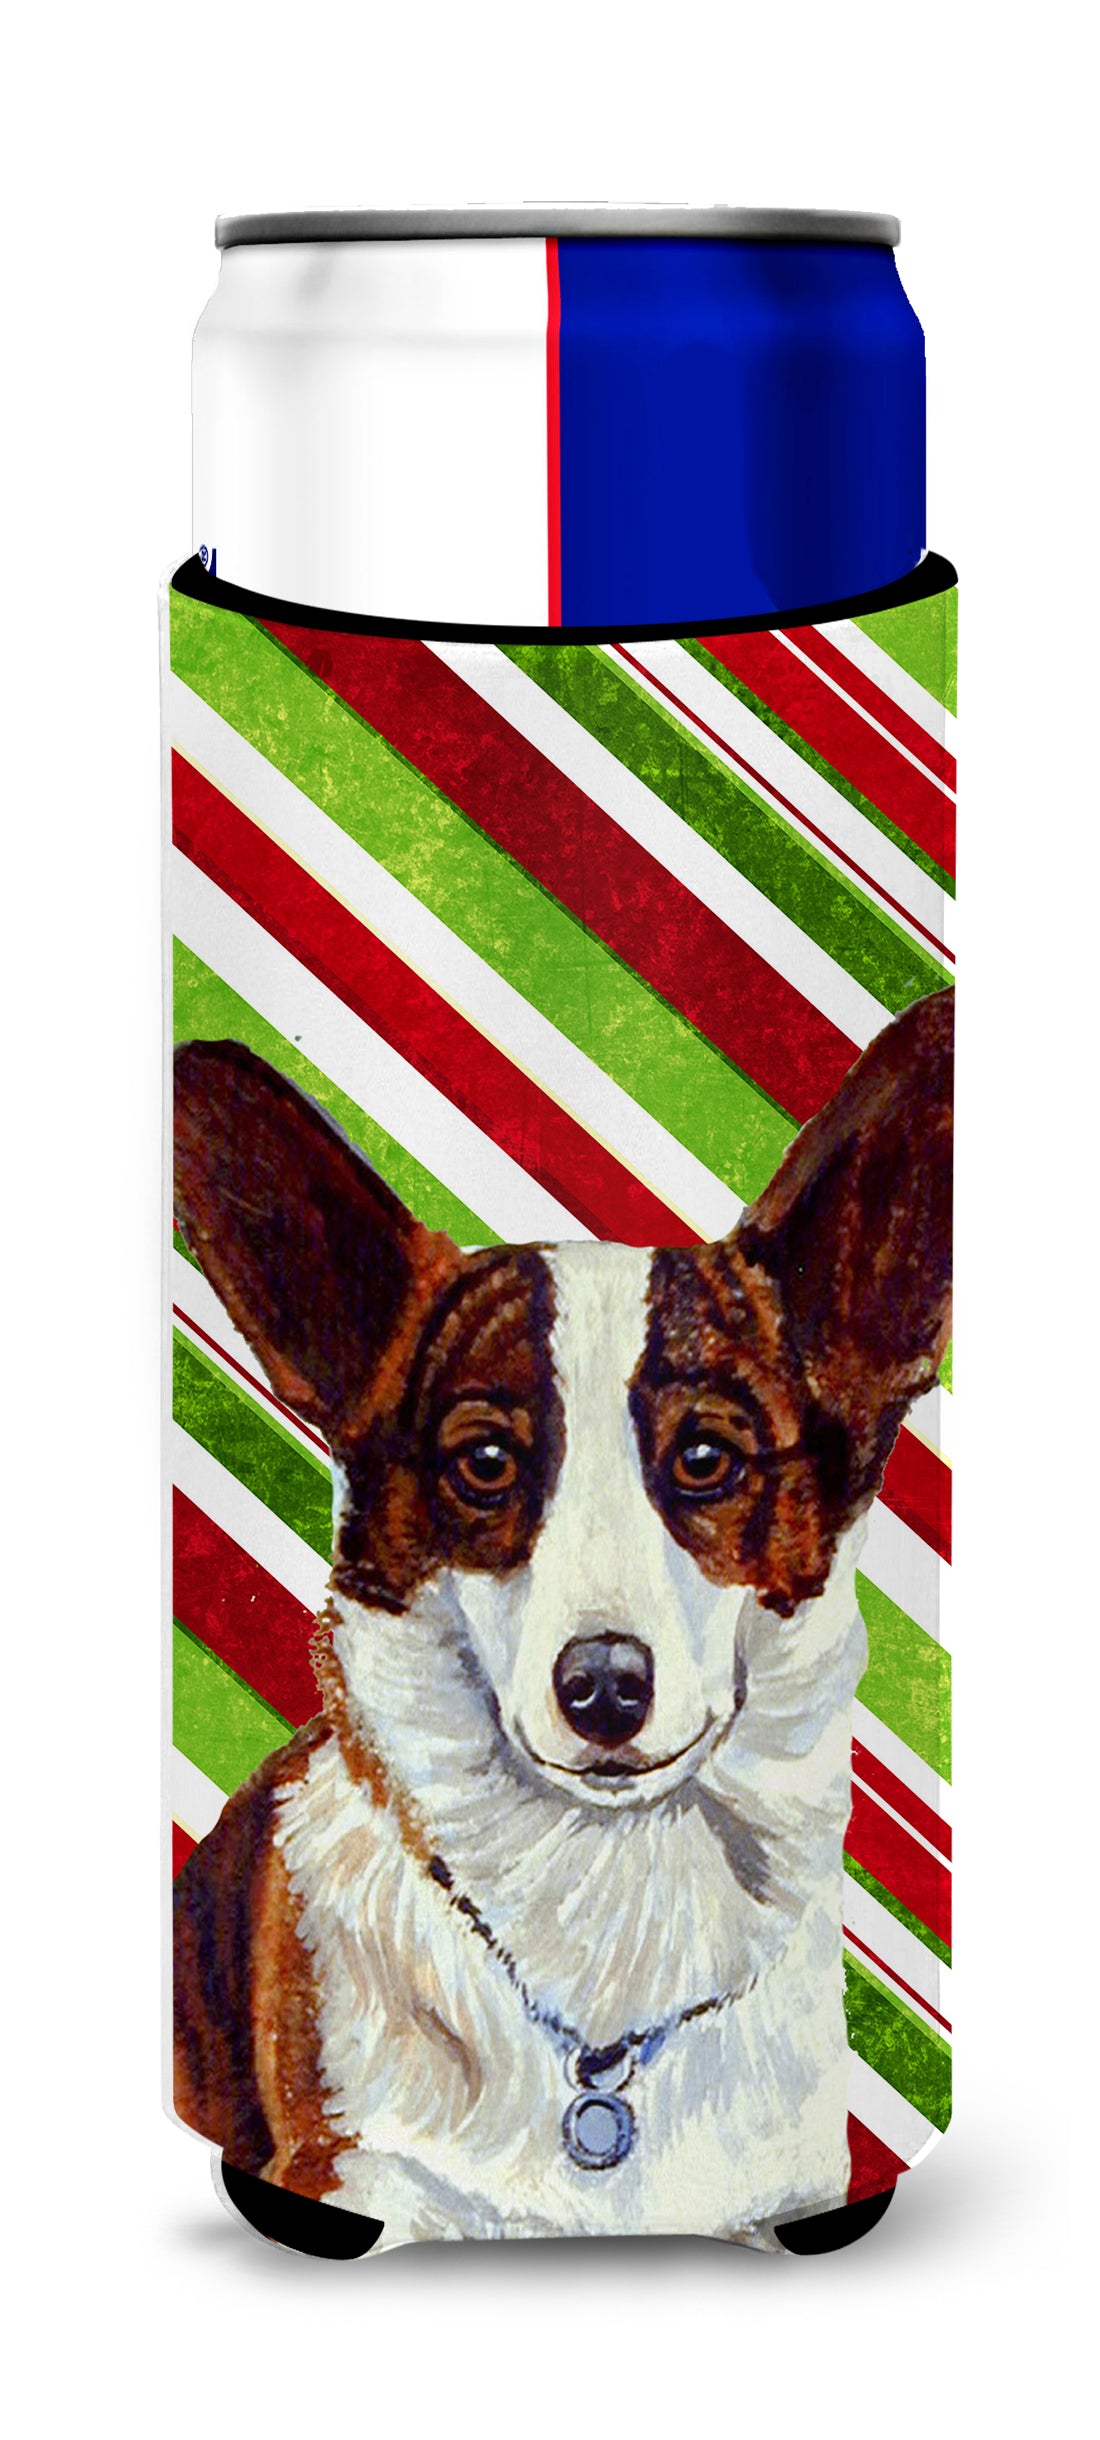 Corgi Candy Cane Holiday Christmas Ultra Beverage Insulators for slim cans LH9243MUK.